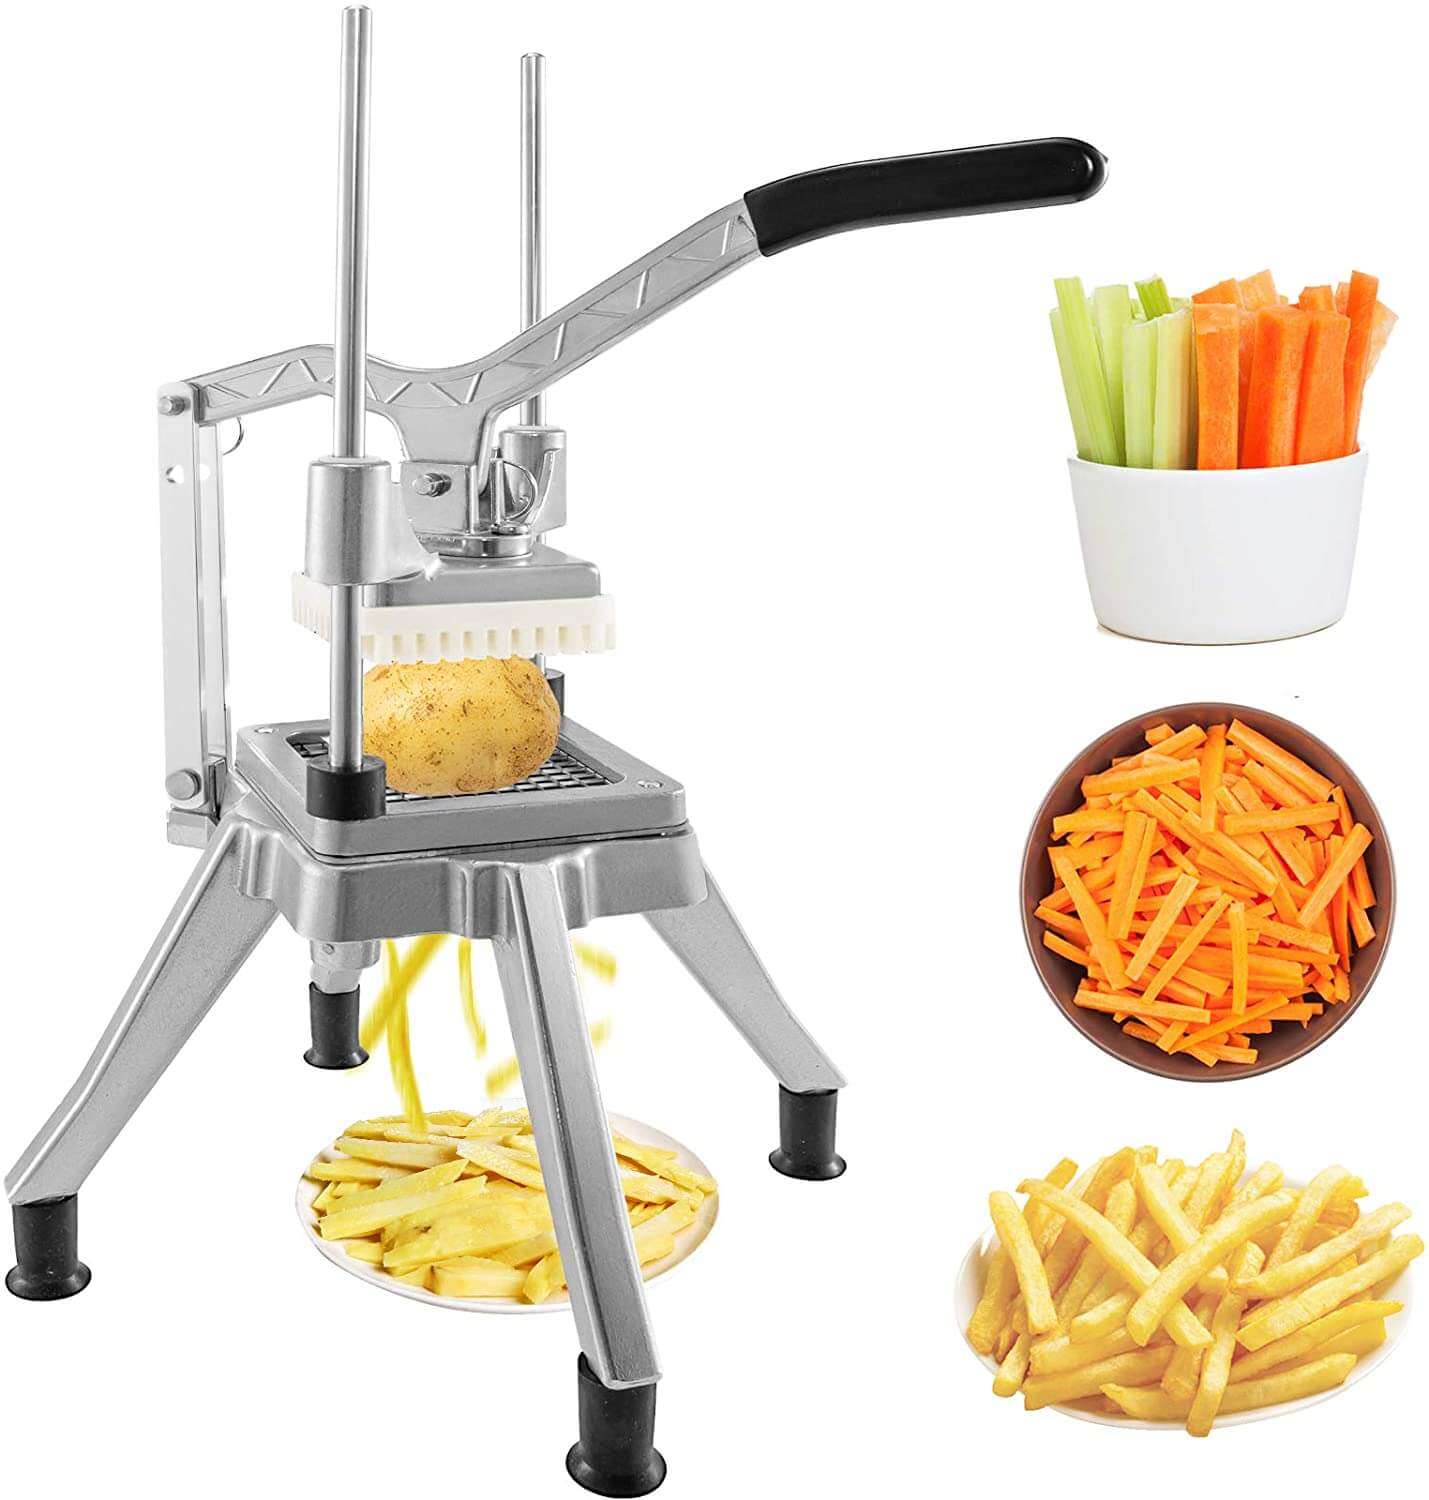 French fry cutter for gastronomy